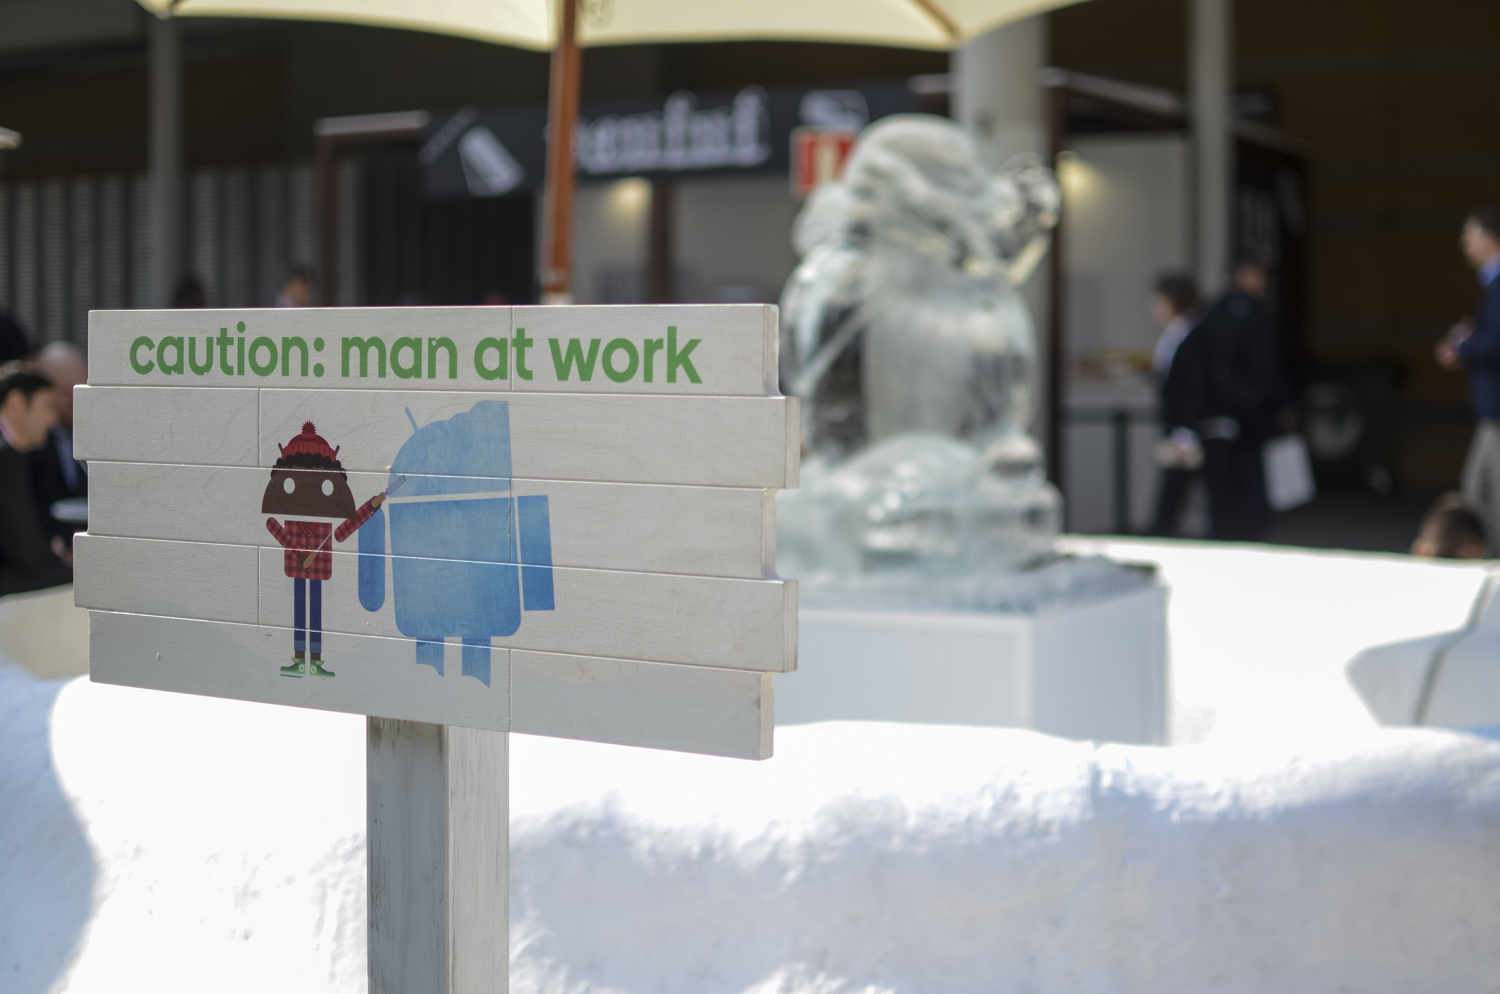 android global village mwc 2017 ice sculpture